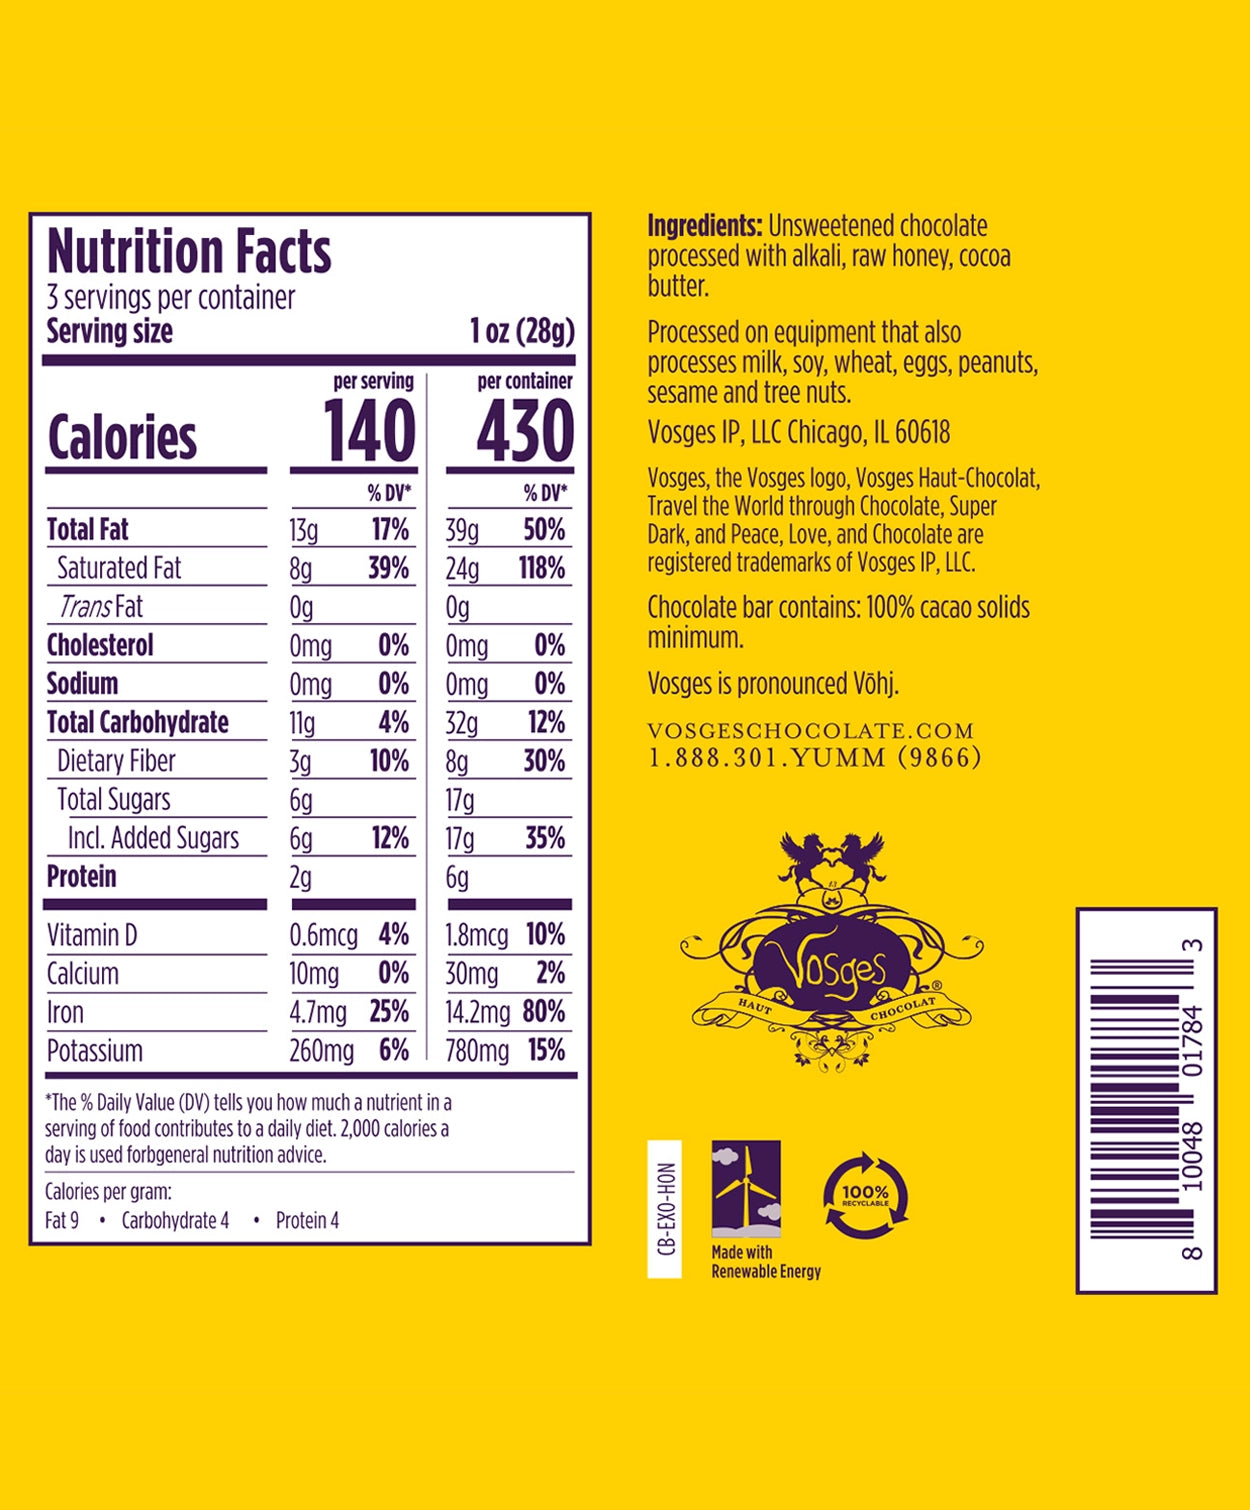 Nutrition Facts and Ingredients of Vosges Haut-Chocolat Raw Honey Cacao bar in white, san-serif font on a bright yellow background.